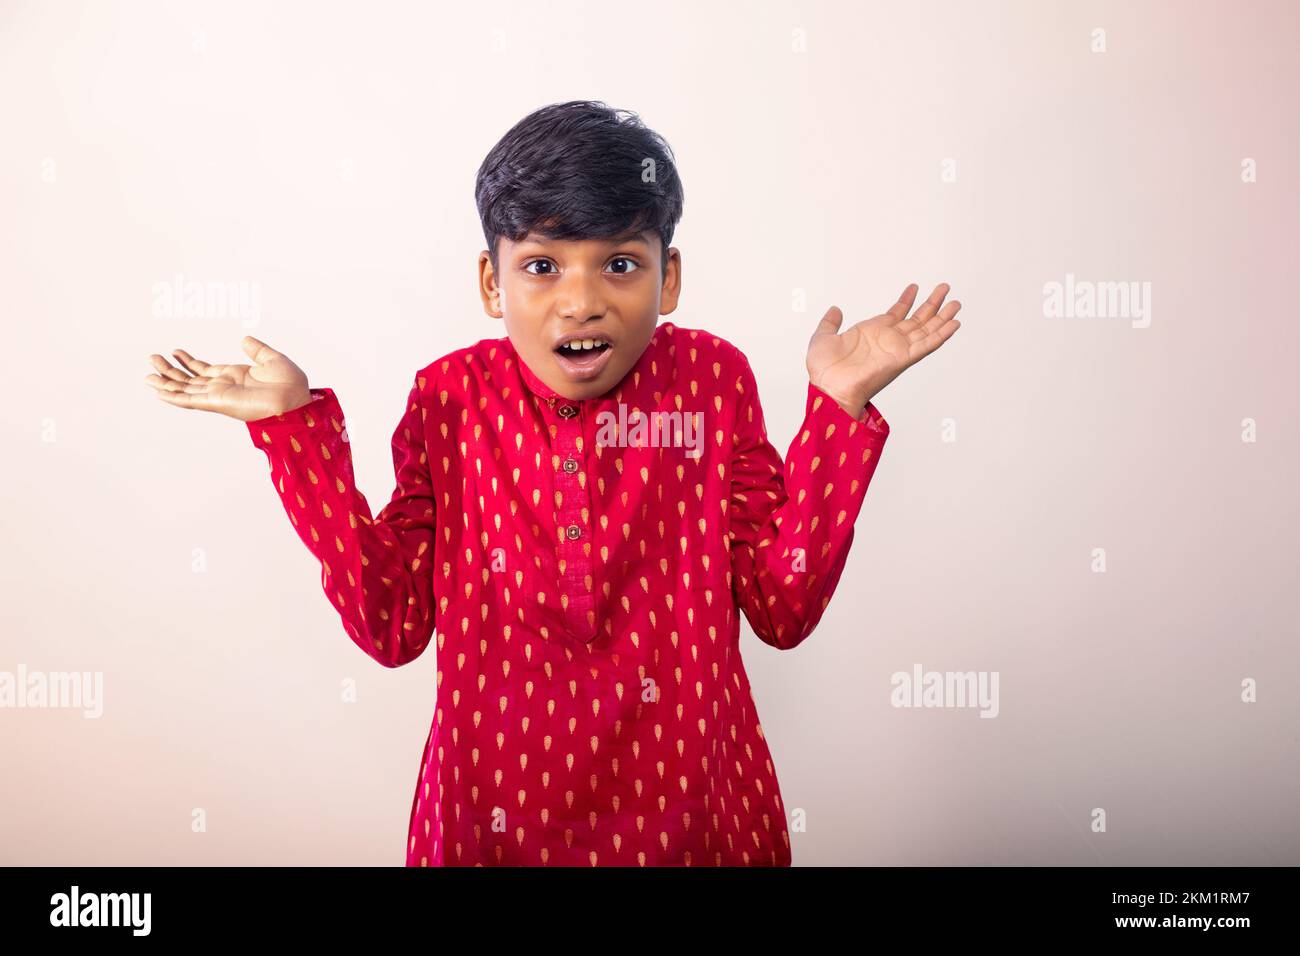 Boy wearing a traditional dress and funny face Stock Photo